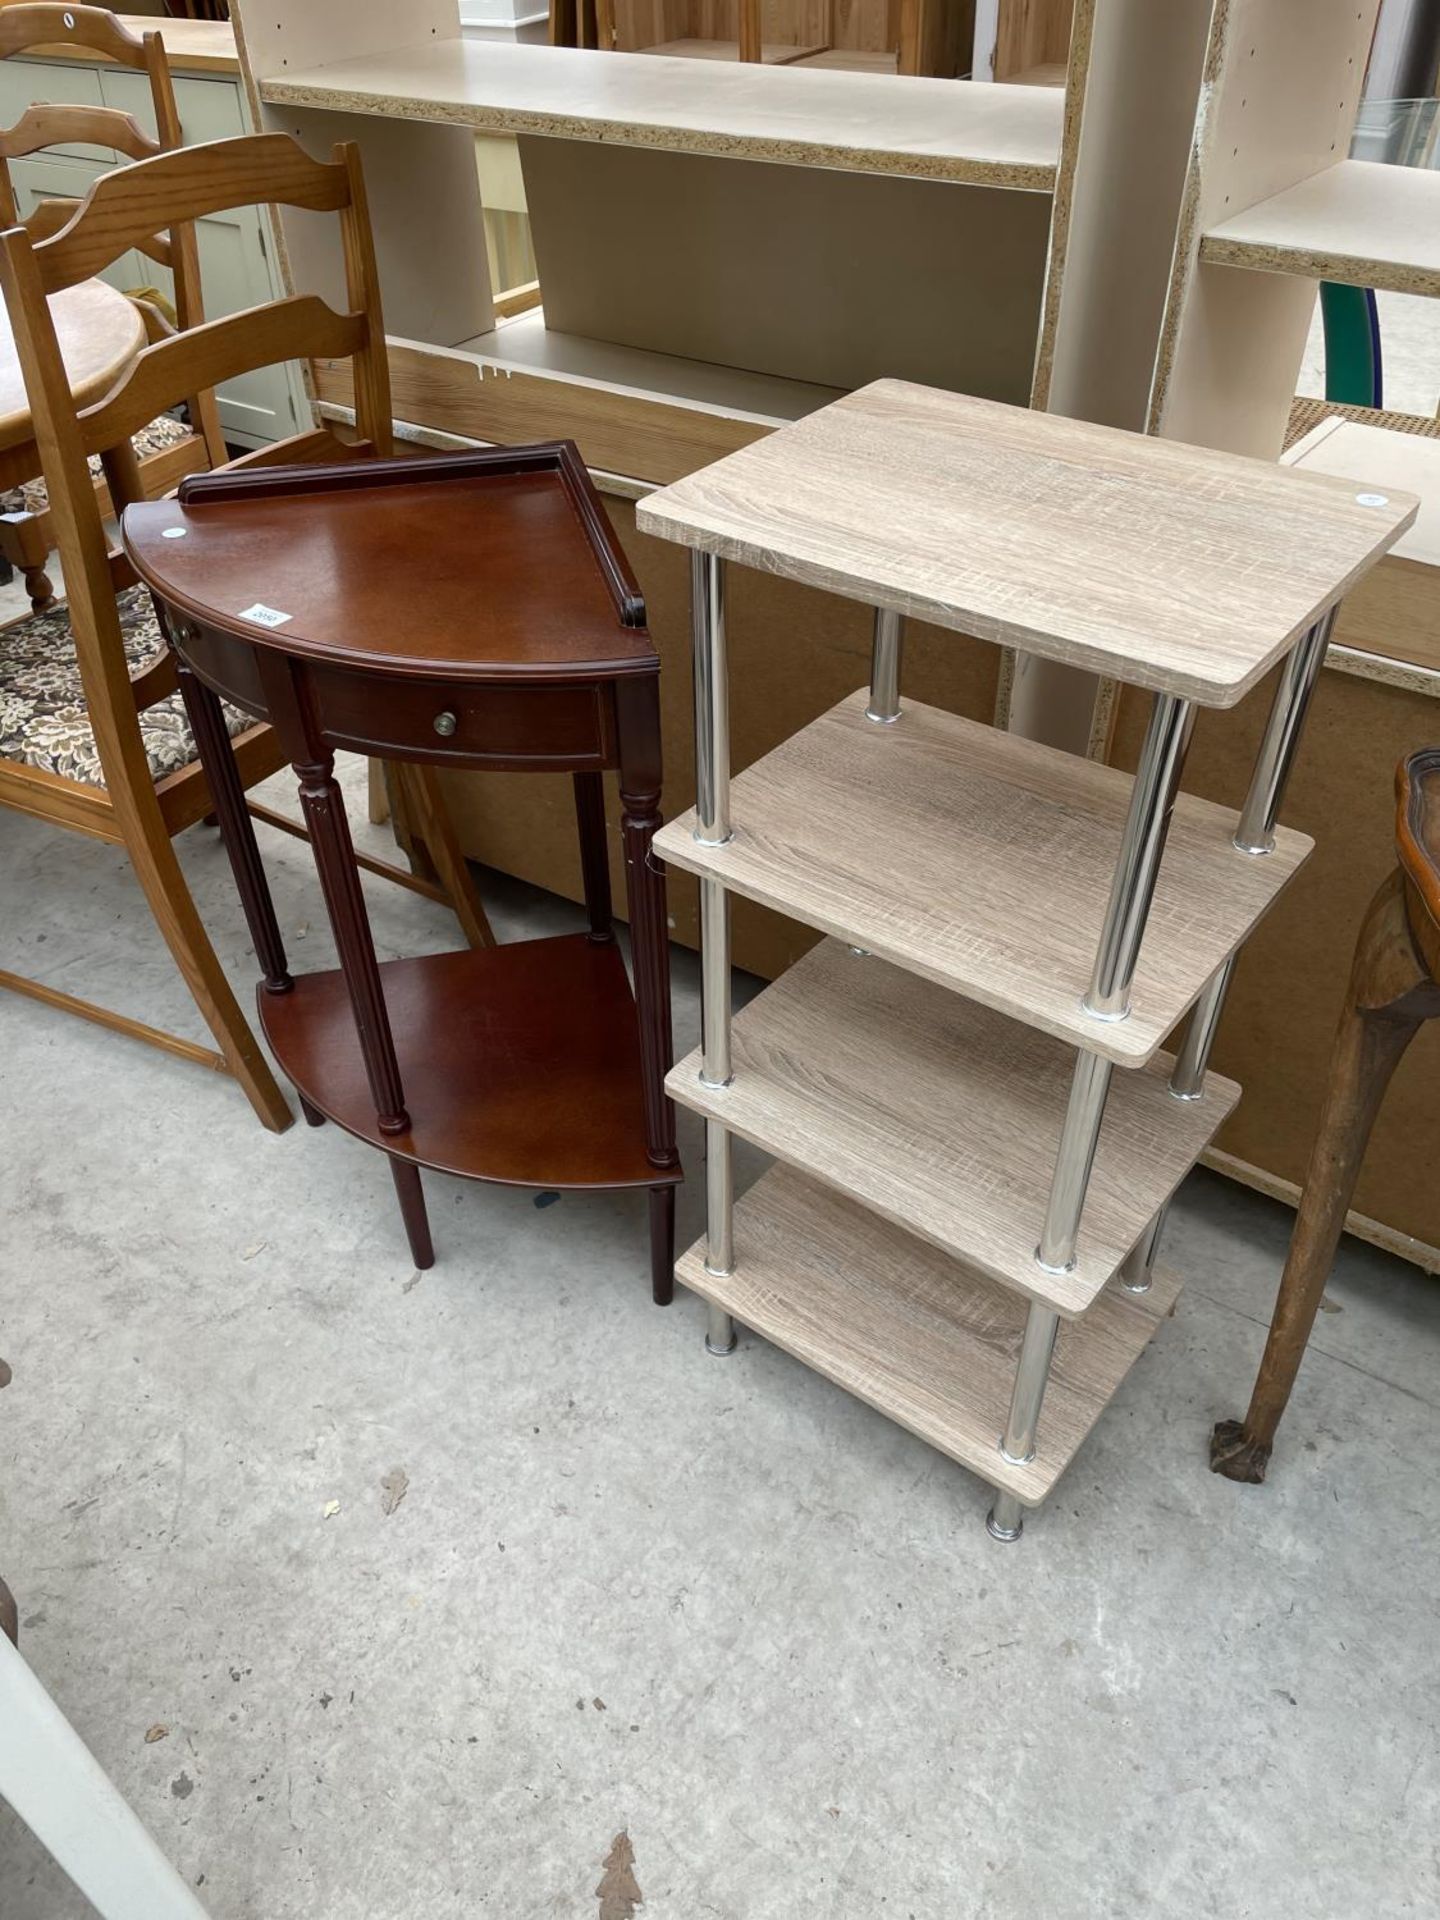 A MODERN CORNER STAND WITH TWO SHAM DRAWERS, FOUR TIER OPEN STAND